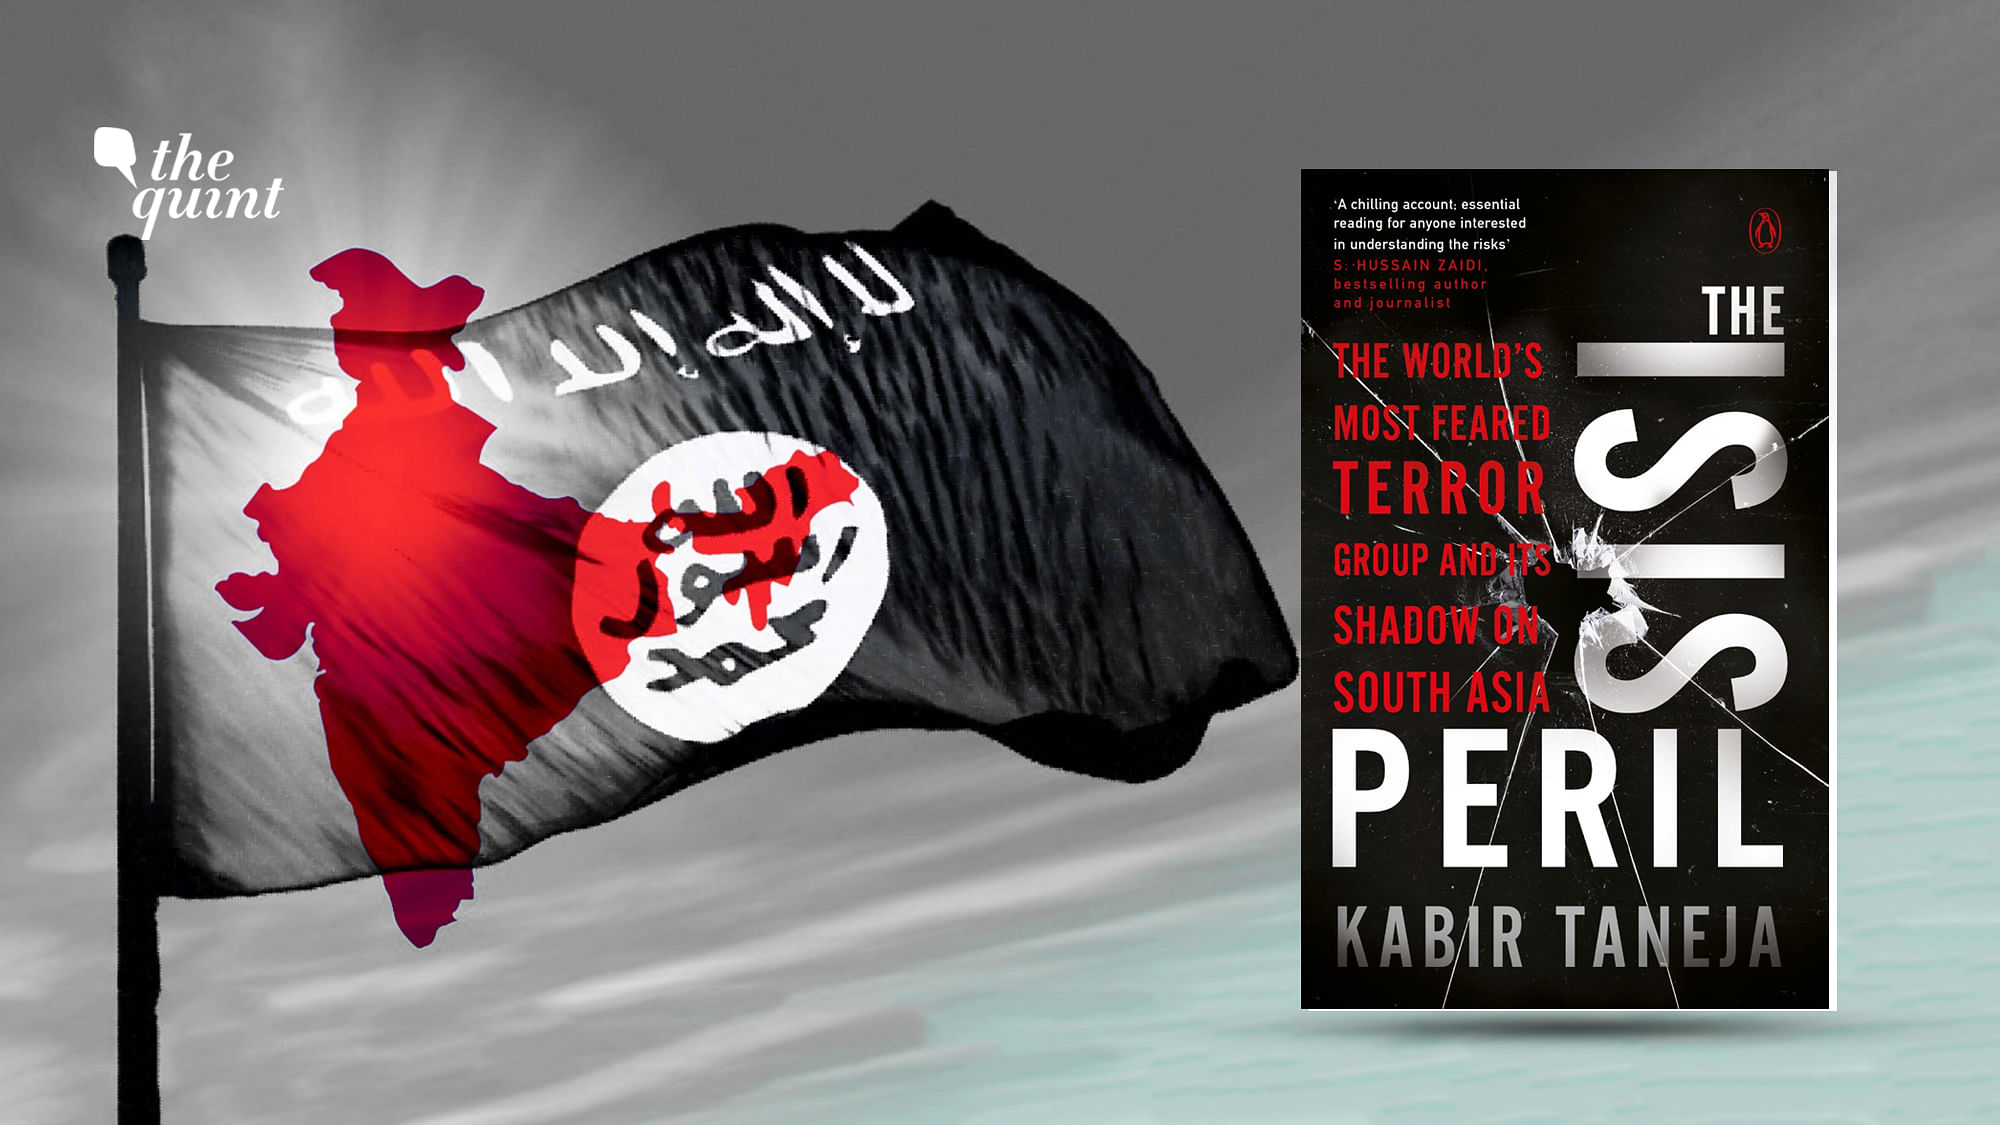 The following excerpt has been taken, with permission, from Chapter 12 – ‘The Online Six Degrees of Separation’ of the book ‘The ISIS Peril: The World’s most feared Terror Group and its Shadow on South Asia’ written by Kabir Taneja.